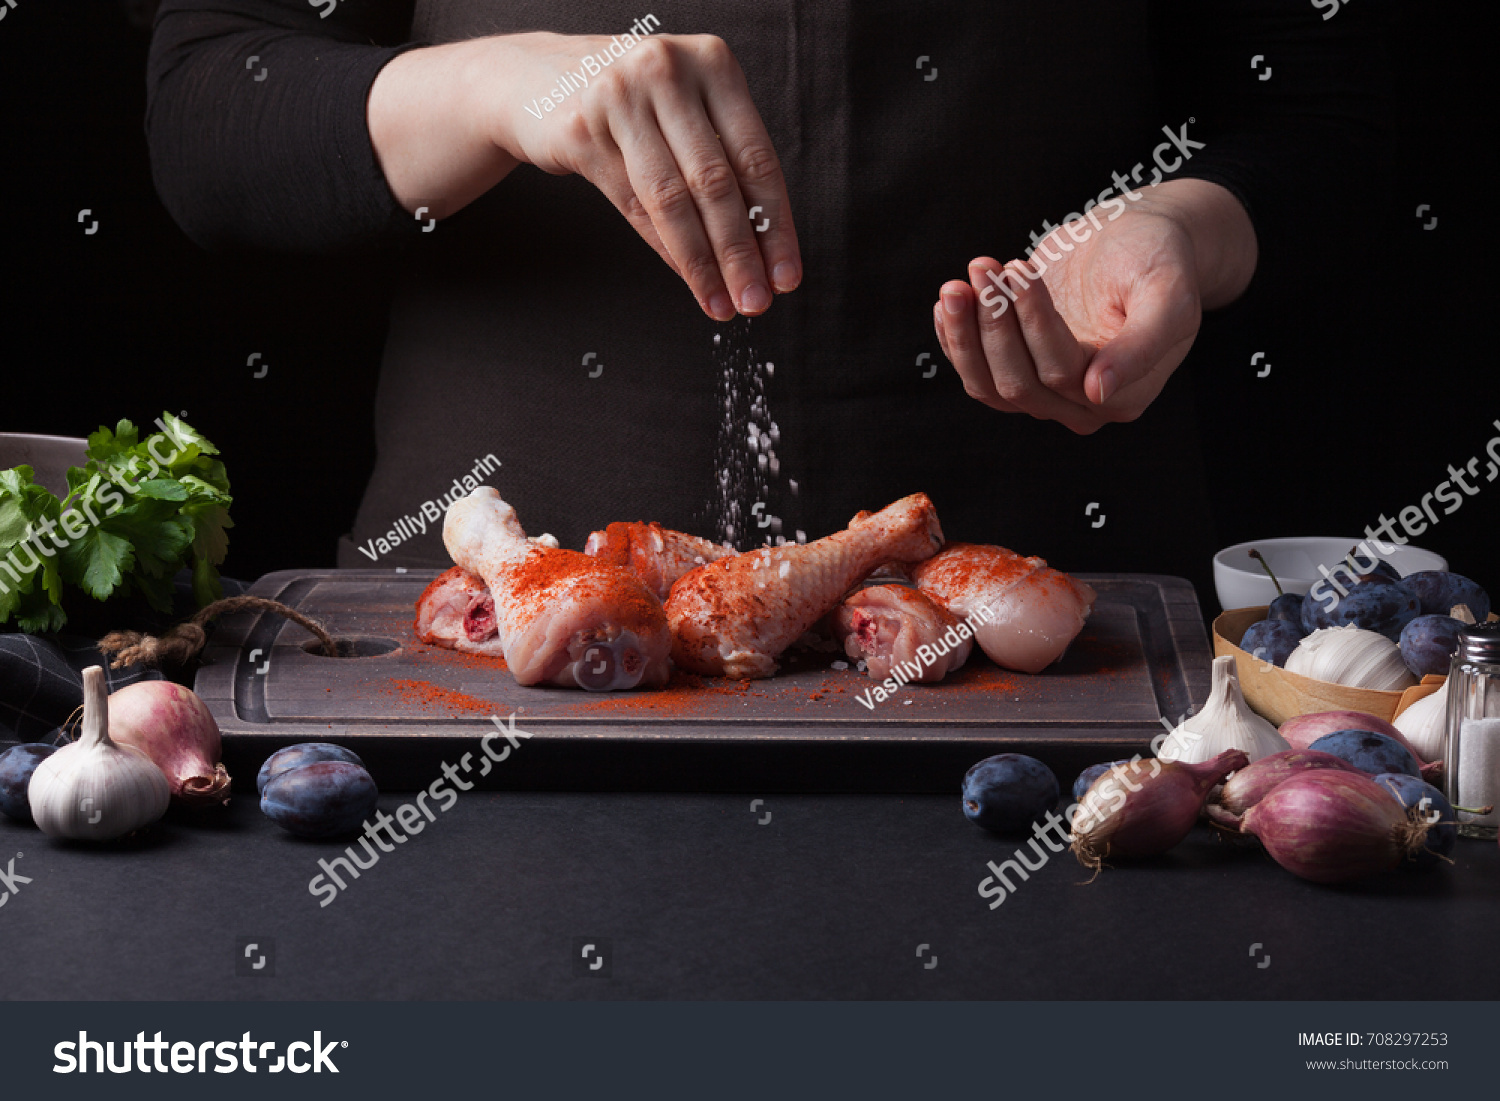 A female chef sprinkles fresh raw chicken drumsticks on a dark background with sea salt. Nearby lie the ingredients for cooking: shallots, blue plums, garlic pepper, salt and parsley. #708297253